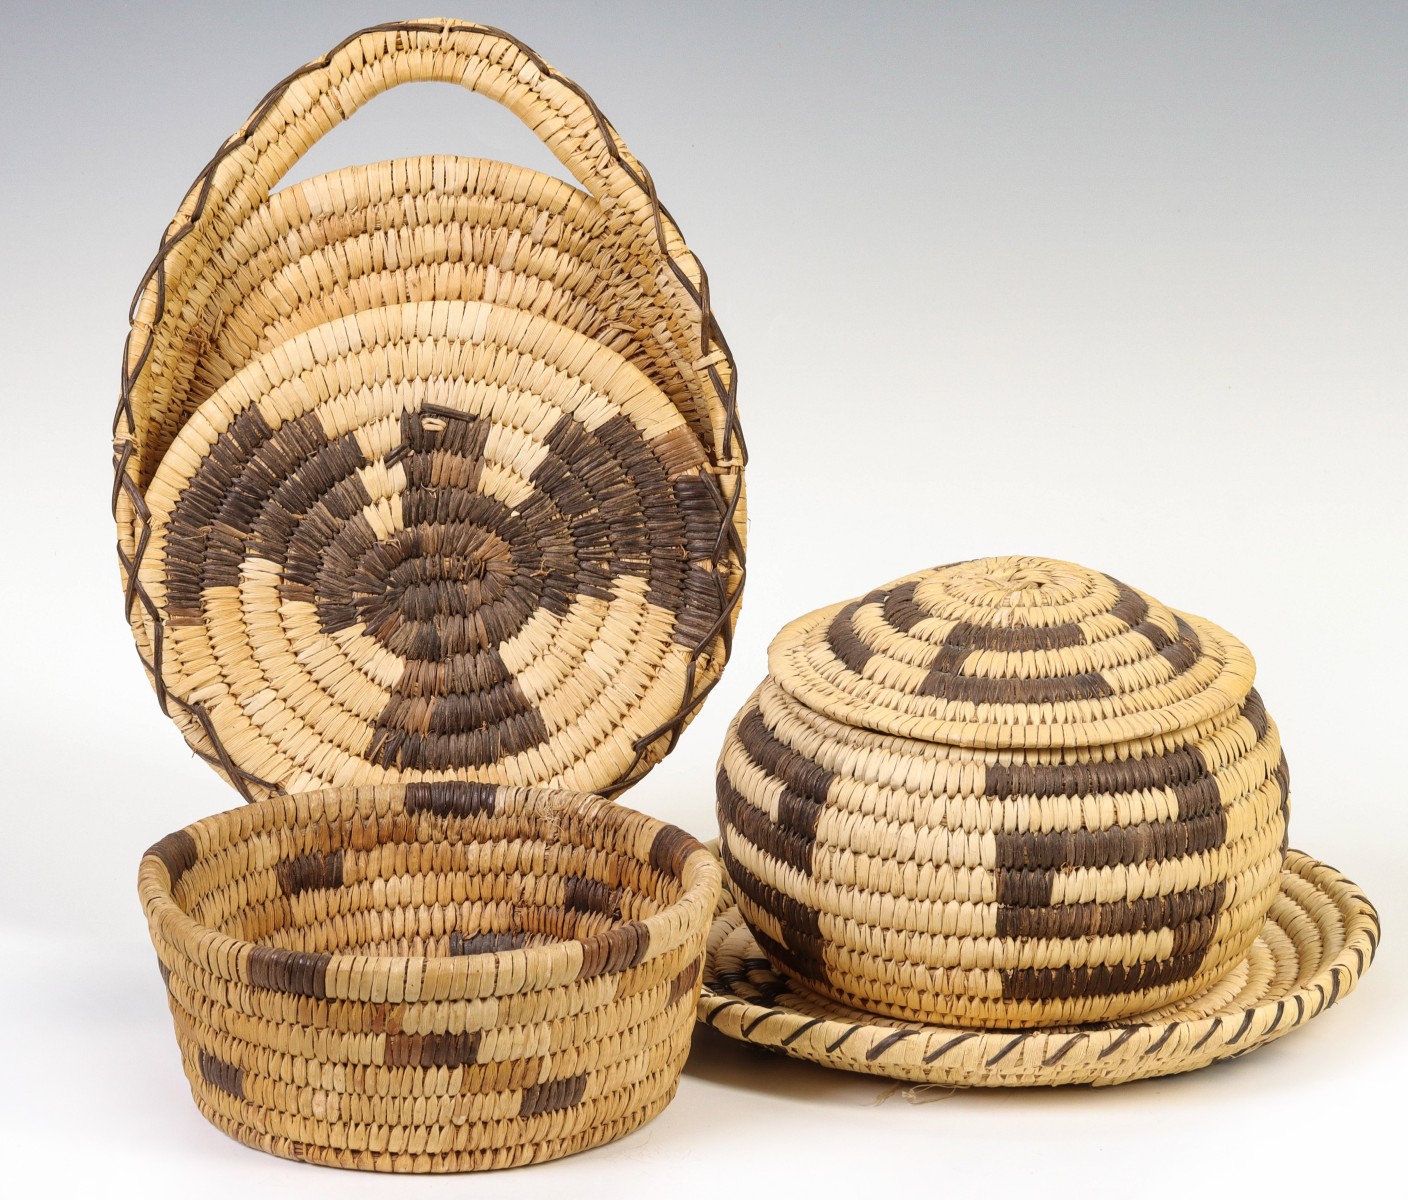 A COLLECTION OF TOHONO O'ODHAM BASKETRY ITEMS